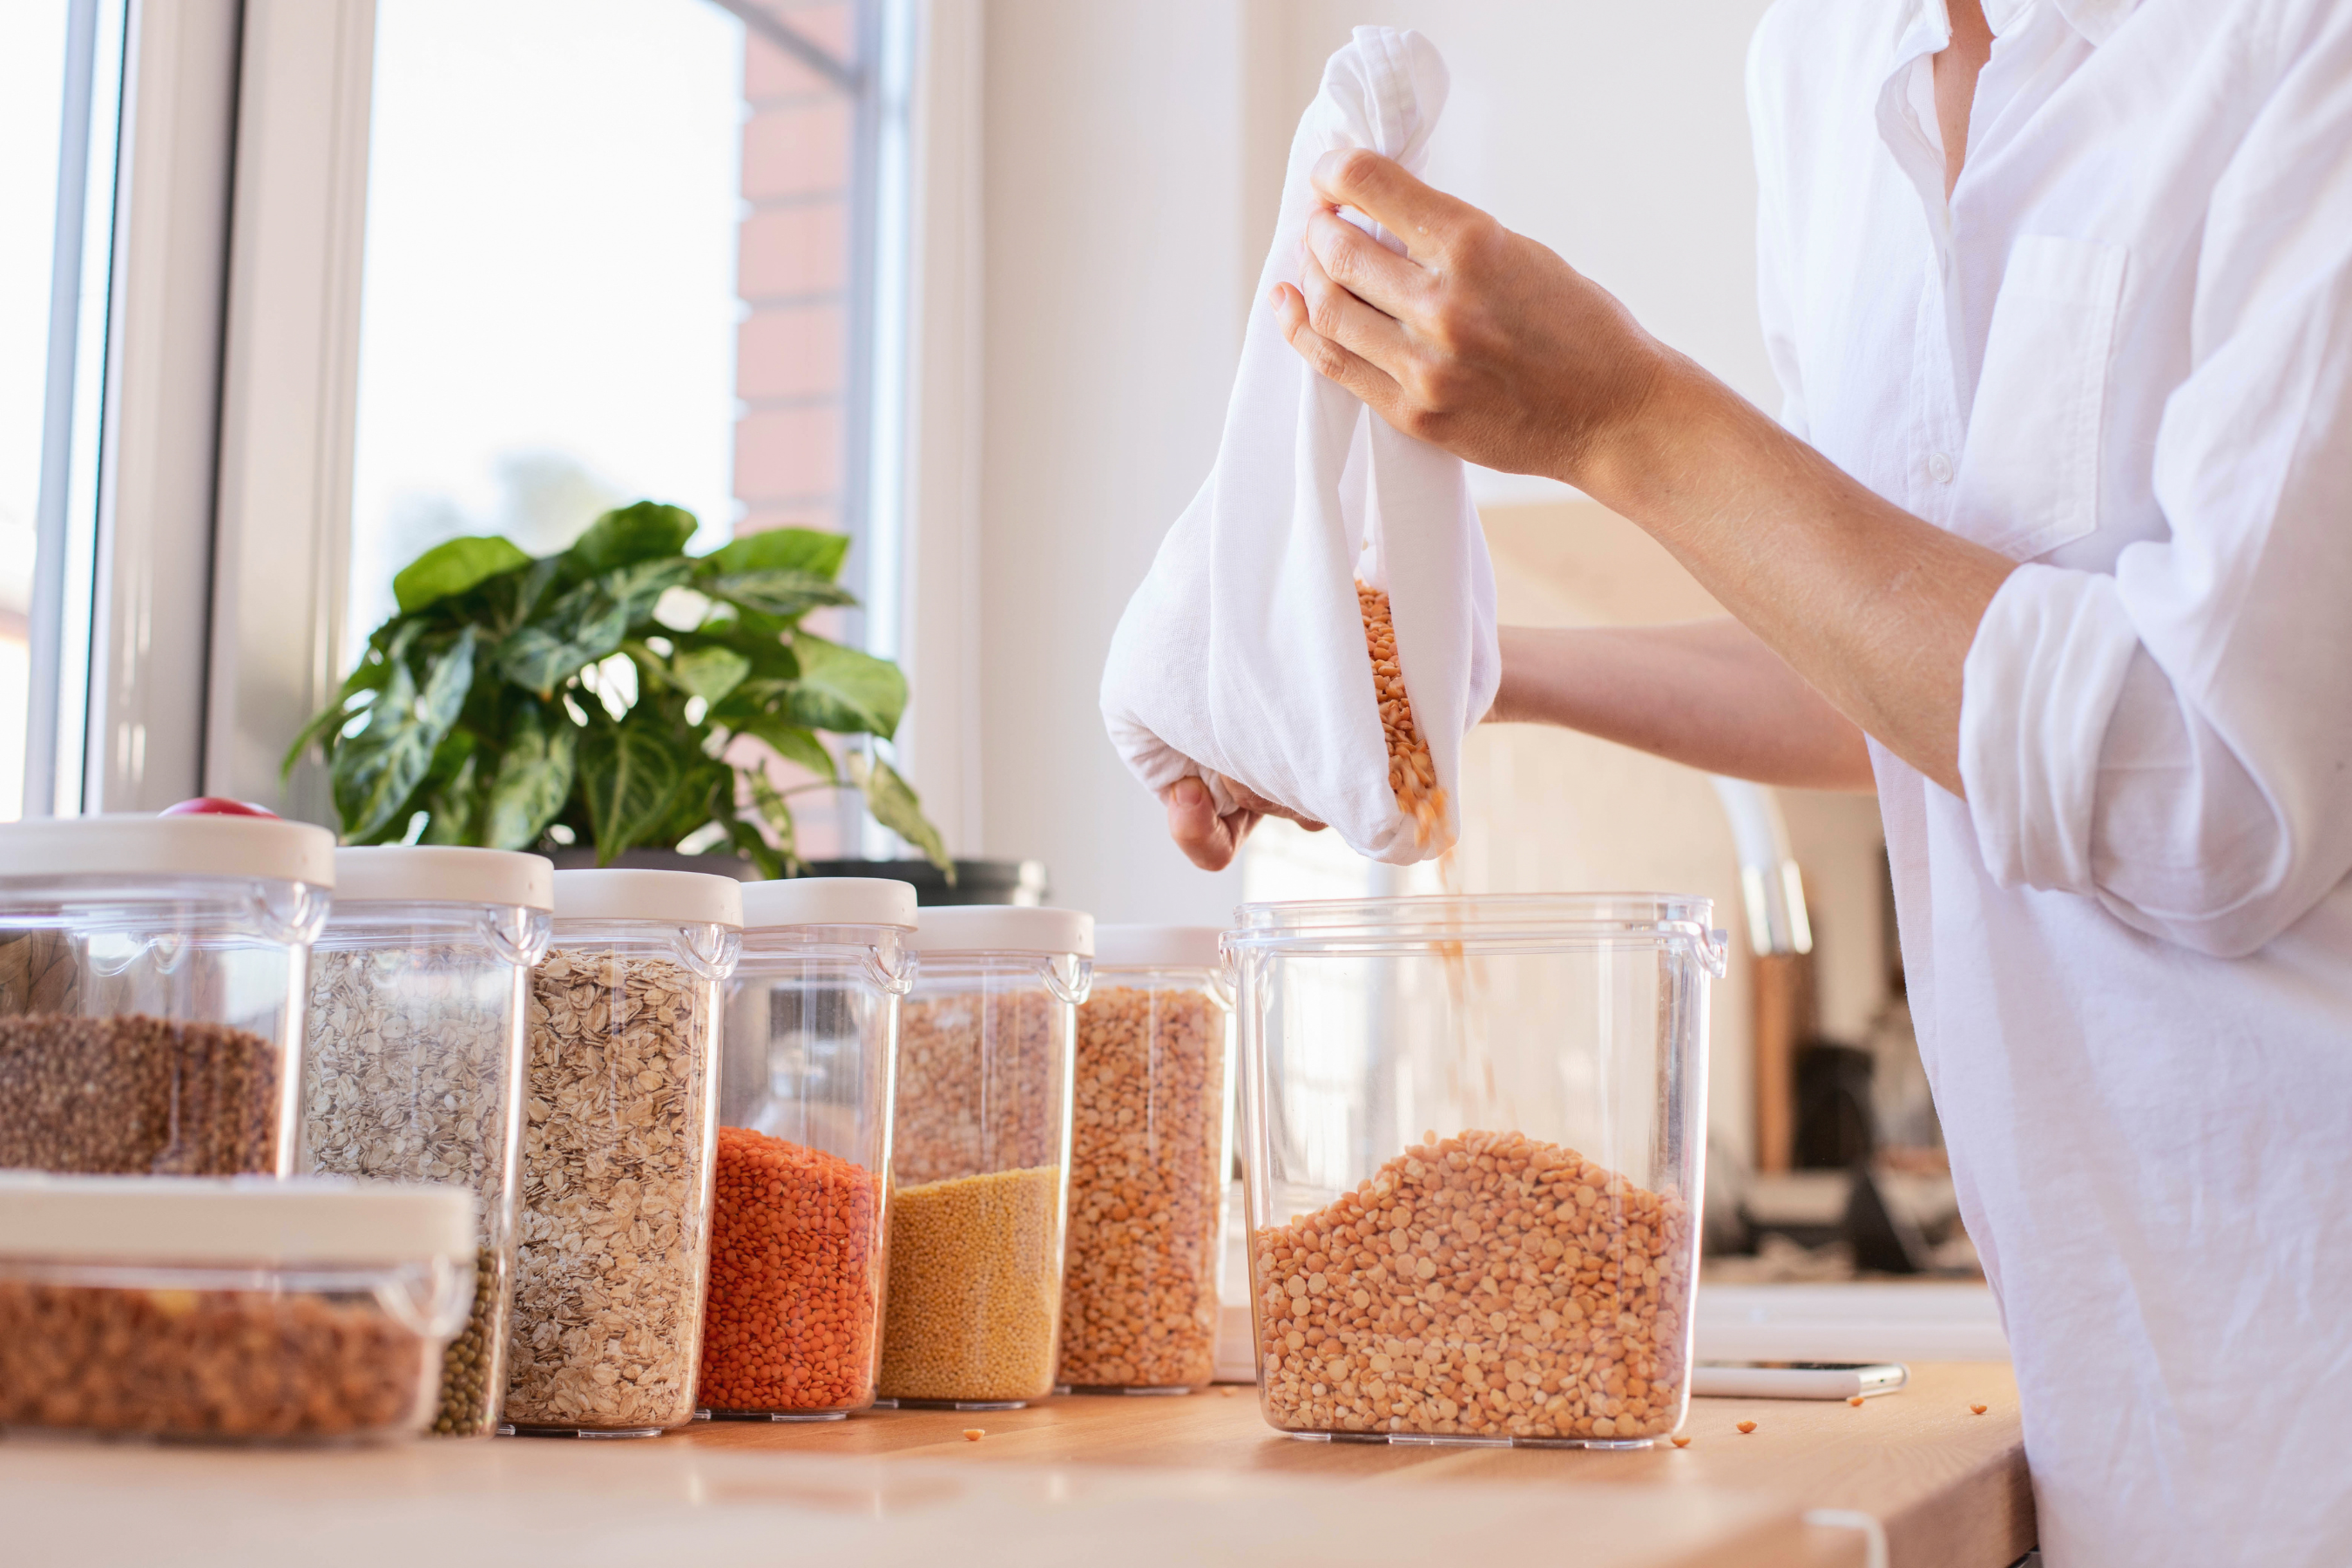 How to Properly Store Whole Grains and Whole Grain Flour